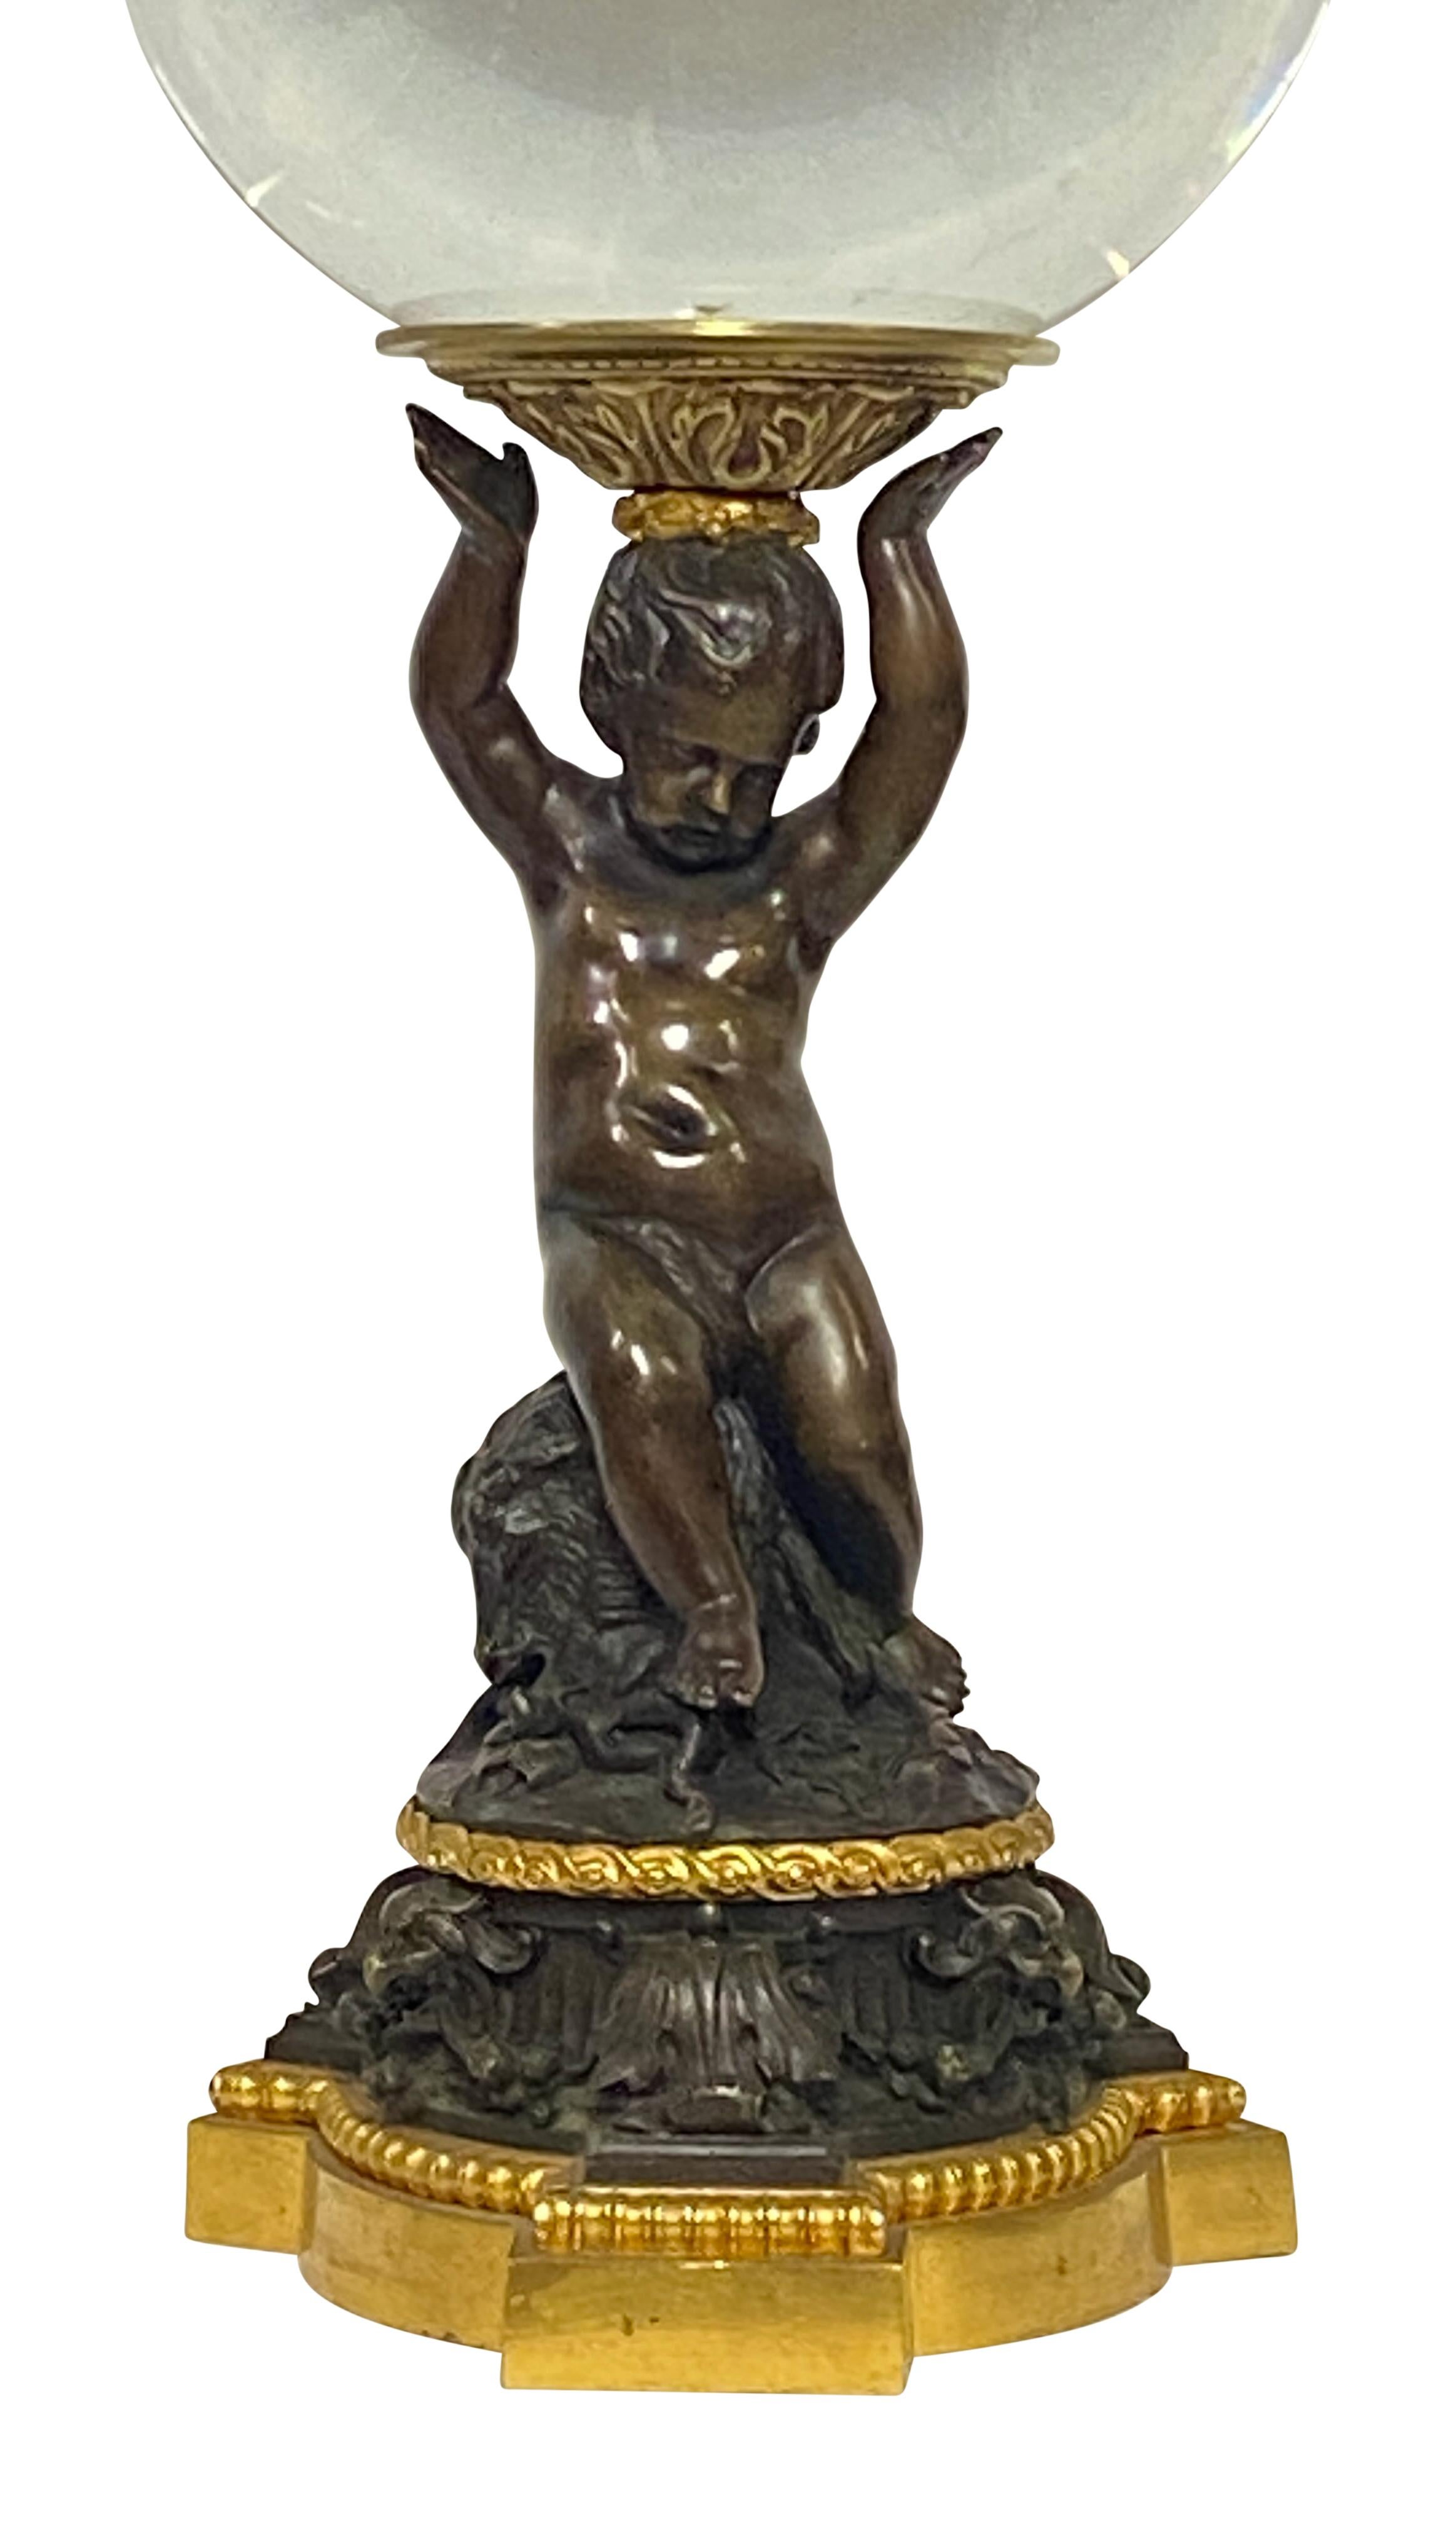 European Crystal Ball on a 19th Century French Bronze Cherub Stand For Sale